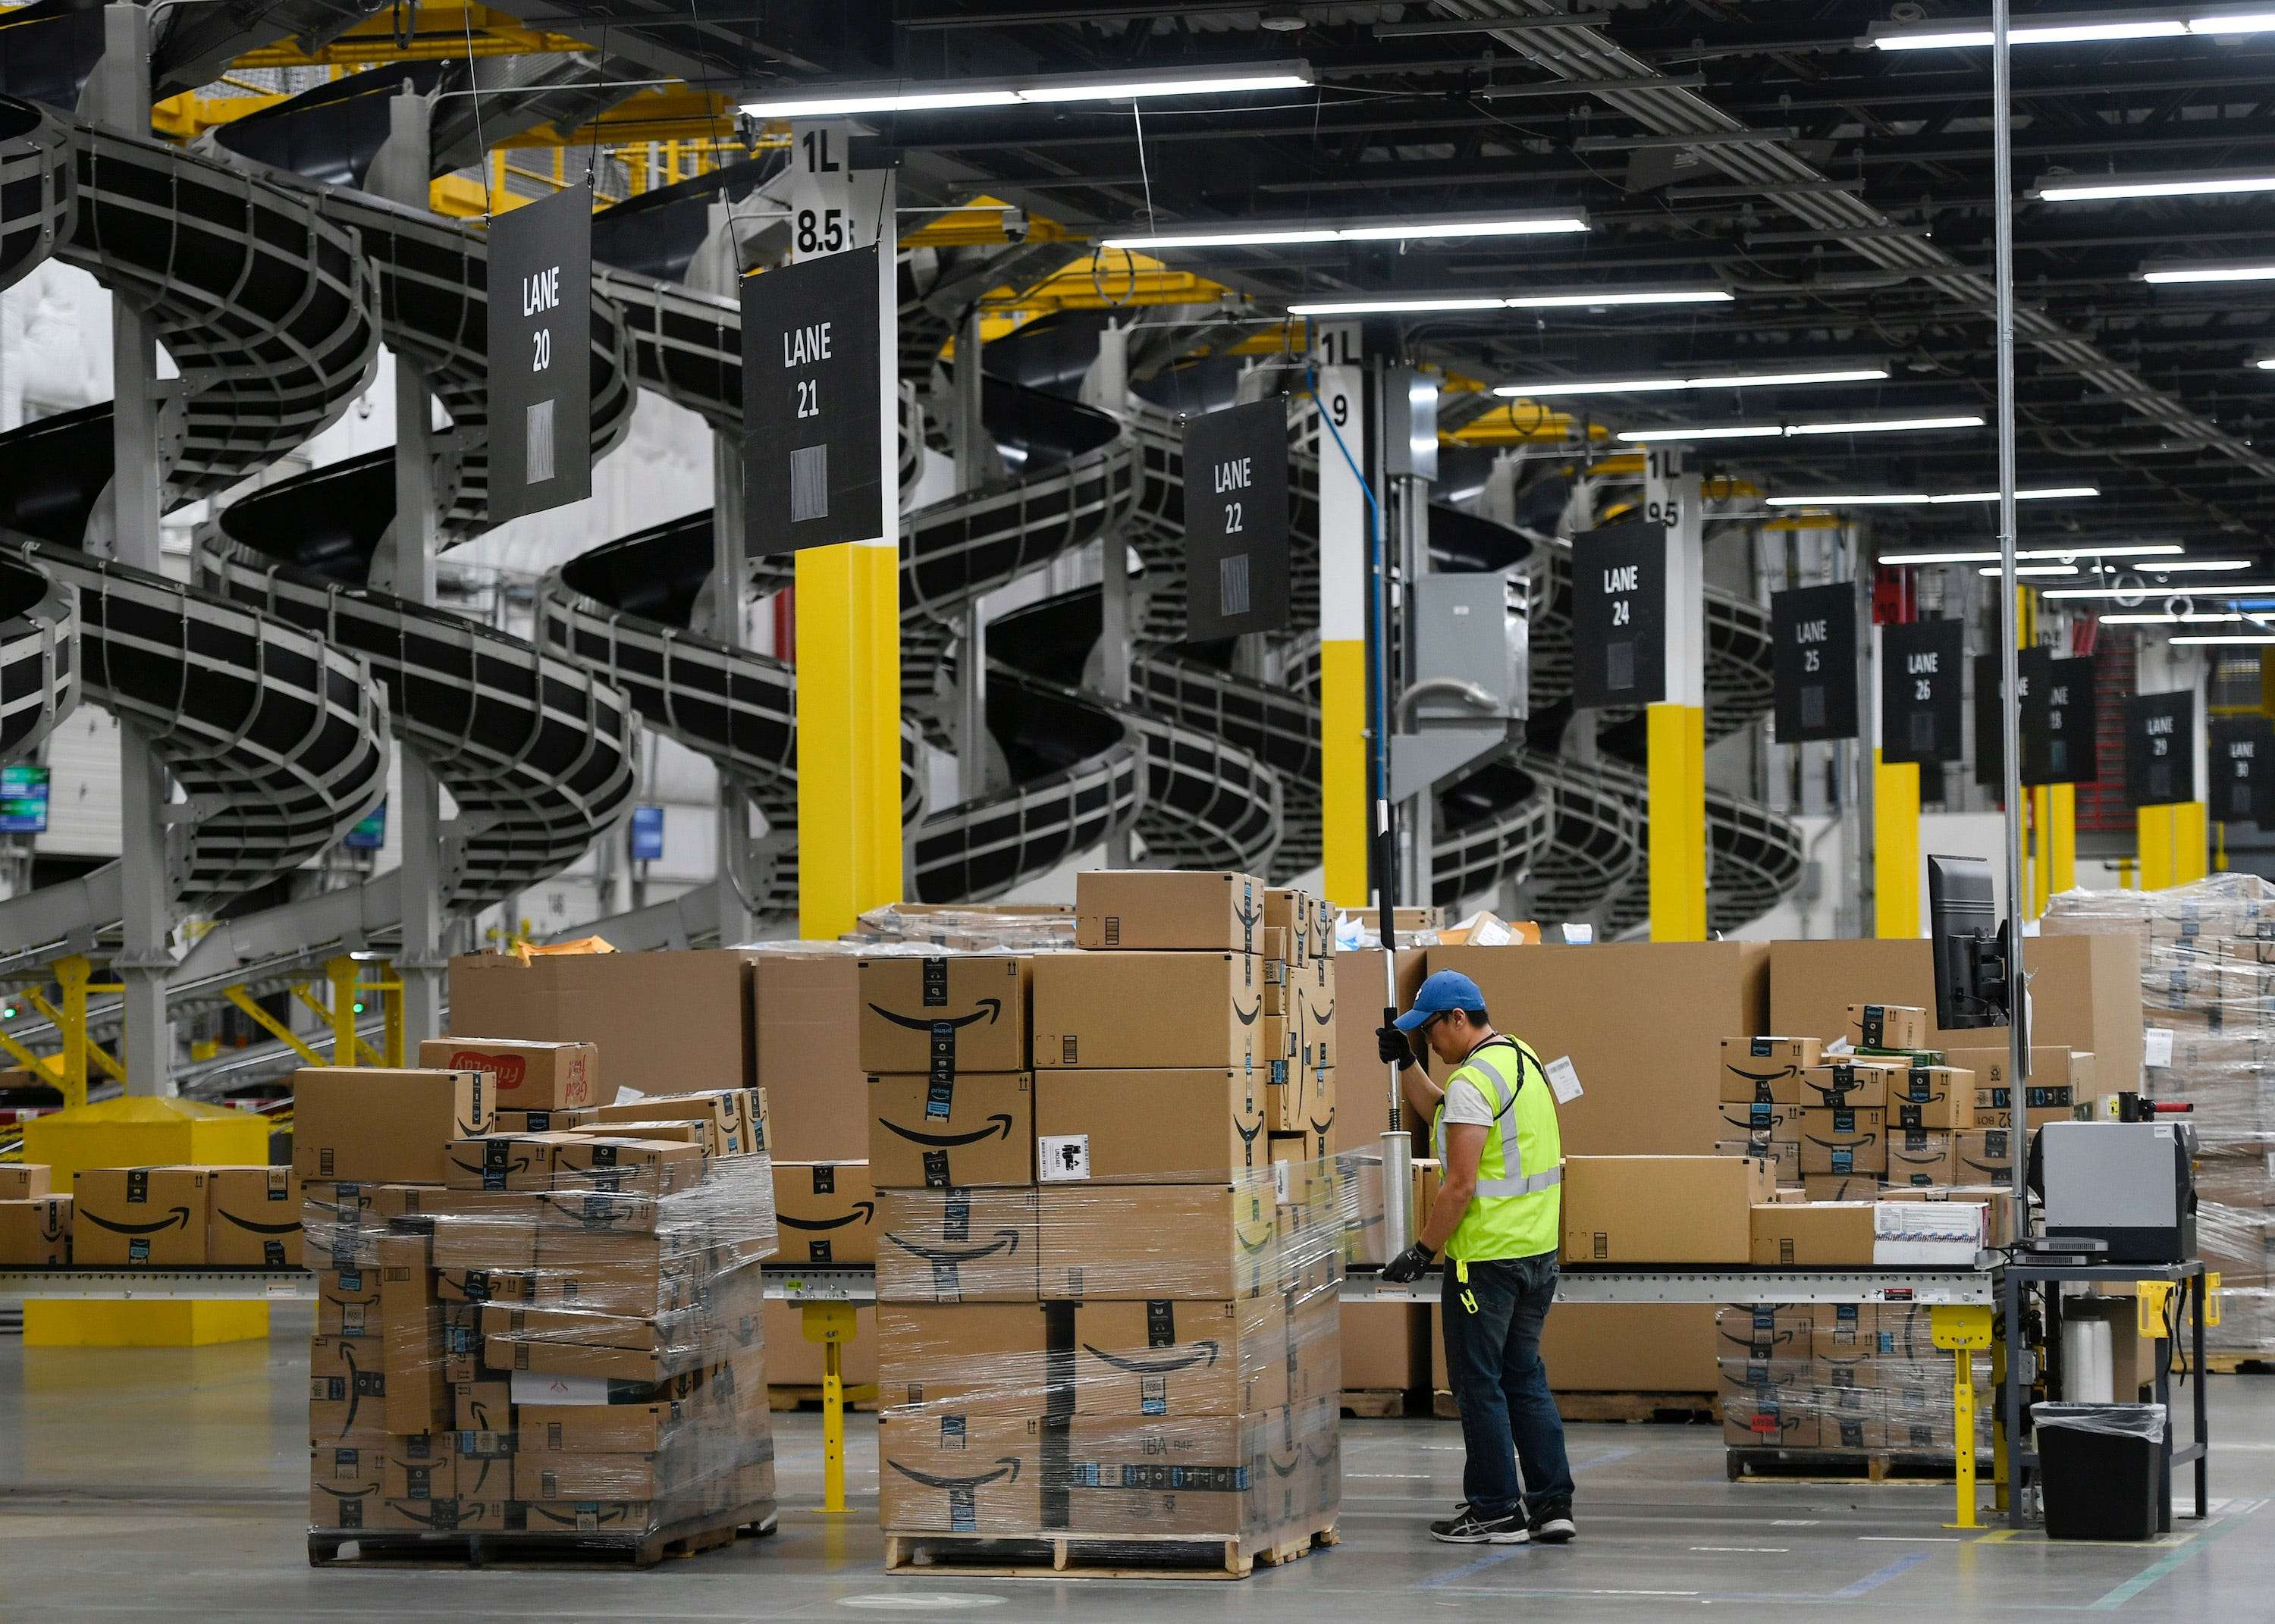 Amazon has been hiring hundreds of thousands of workers for roles in its warehouses, which it calls fulfillment centers, but those employees have been